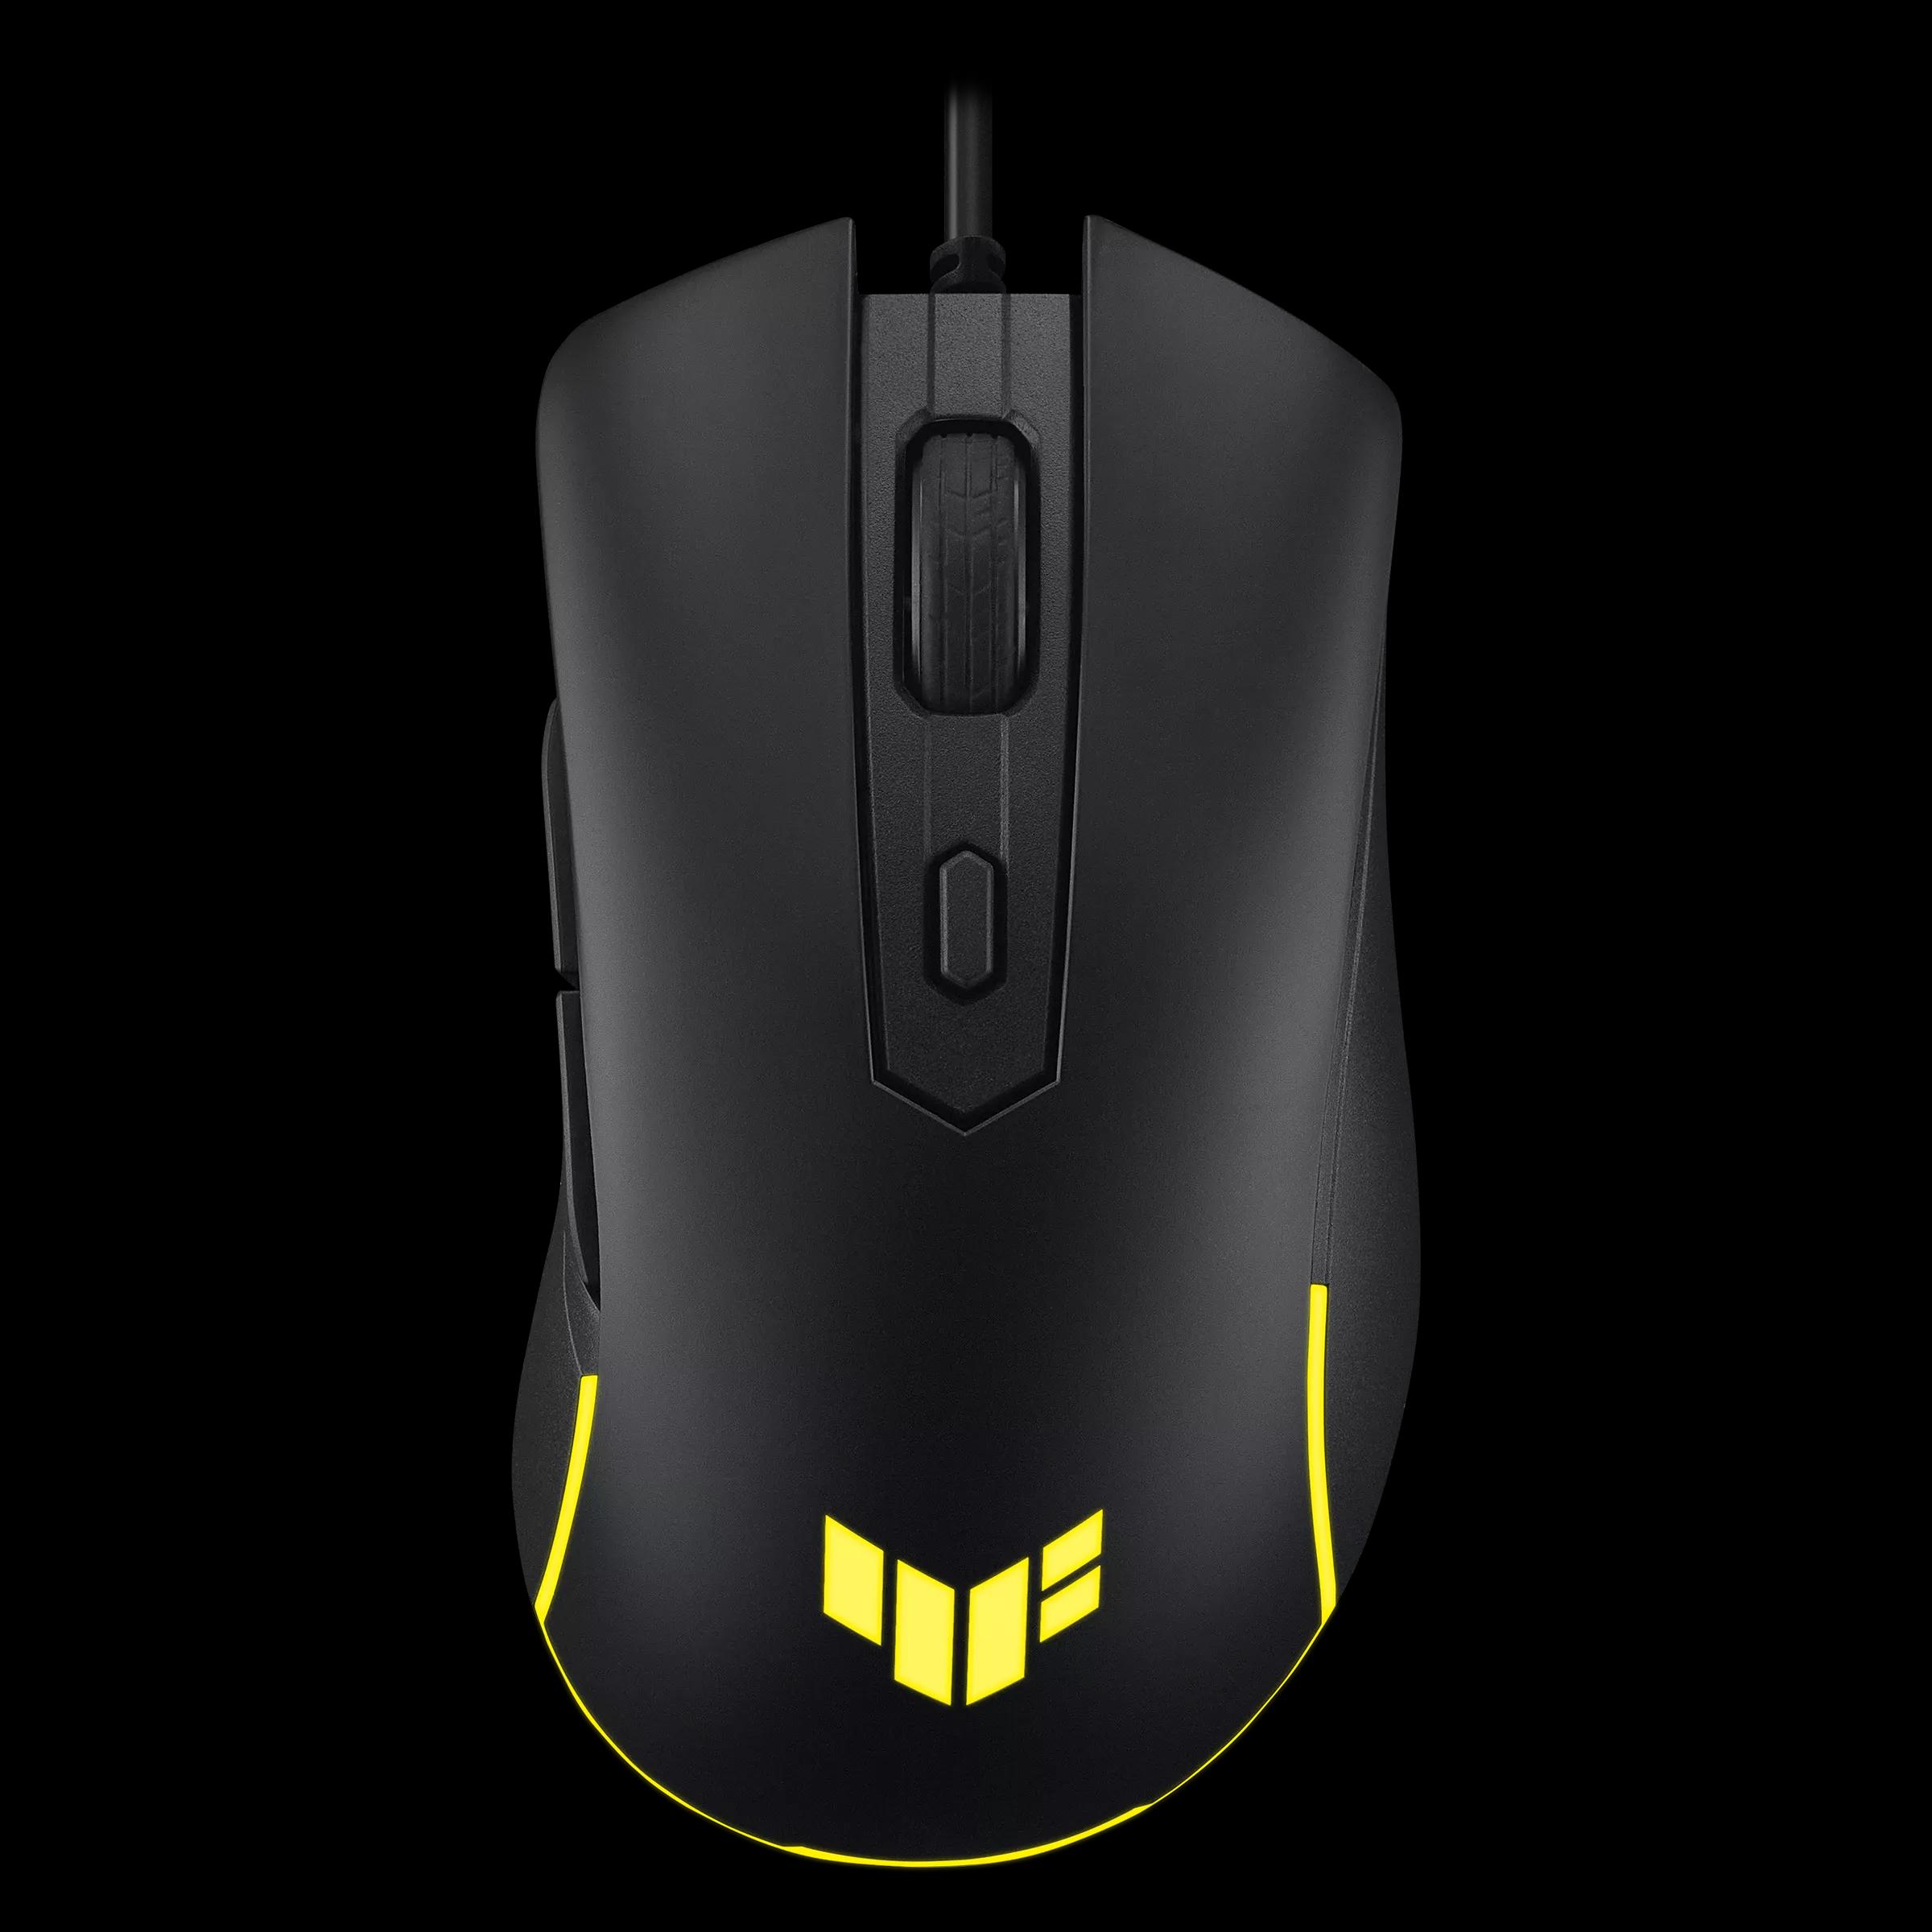 TUF M3 GENII GAMIONG MOUSE